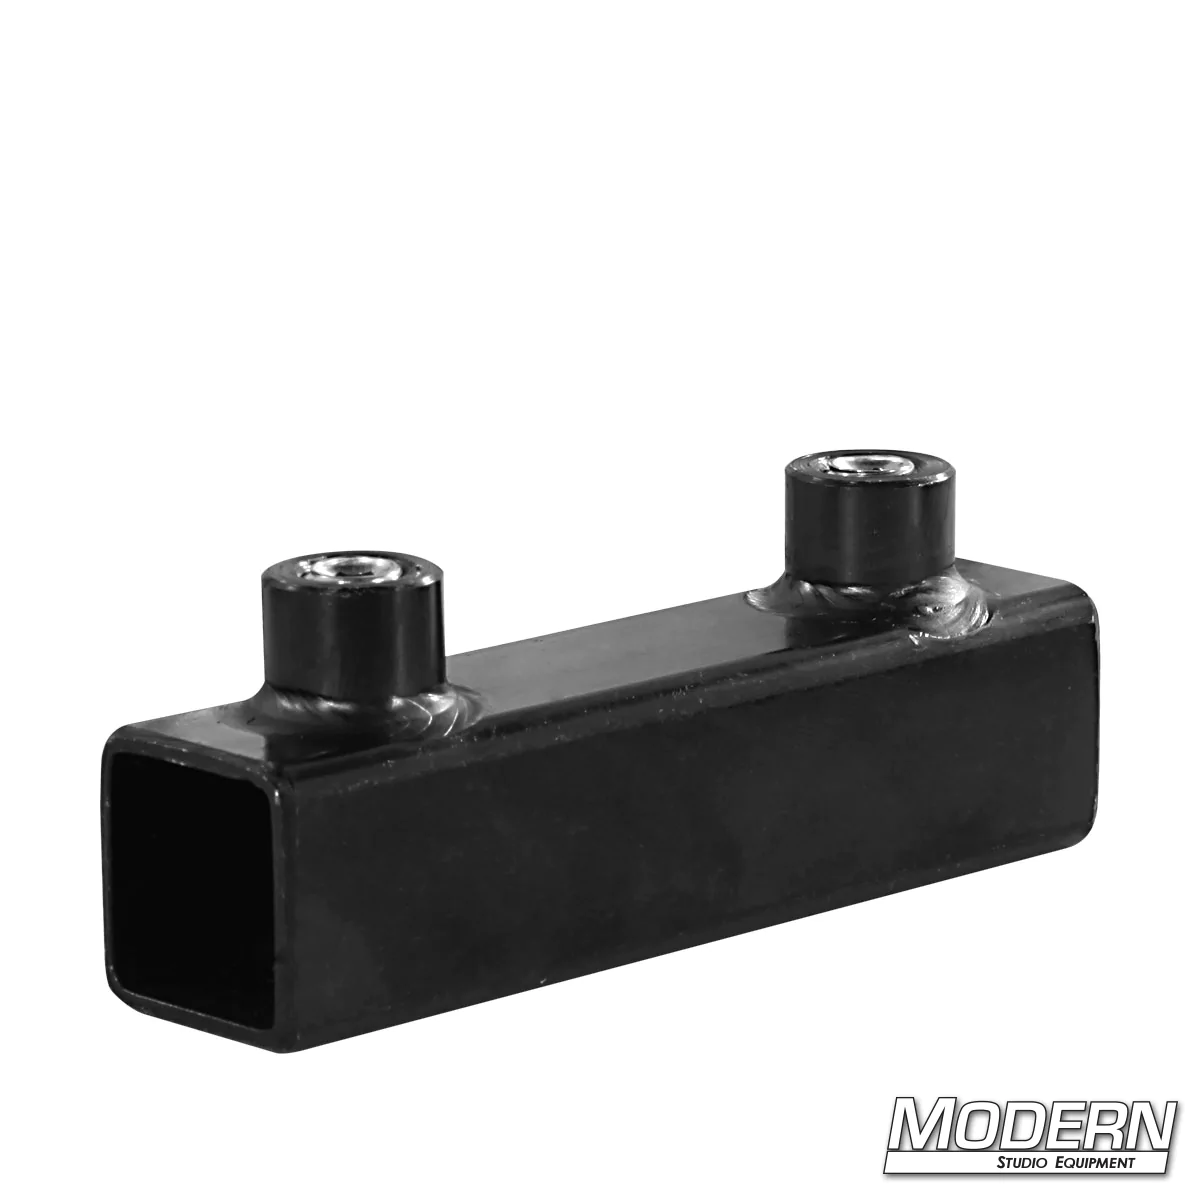 Sleeve for 3/4-inch Square Tube - Black Zinc with Set Screws